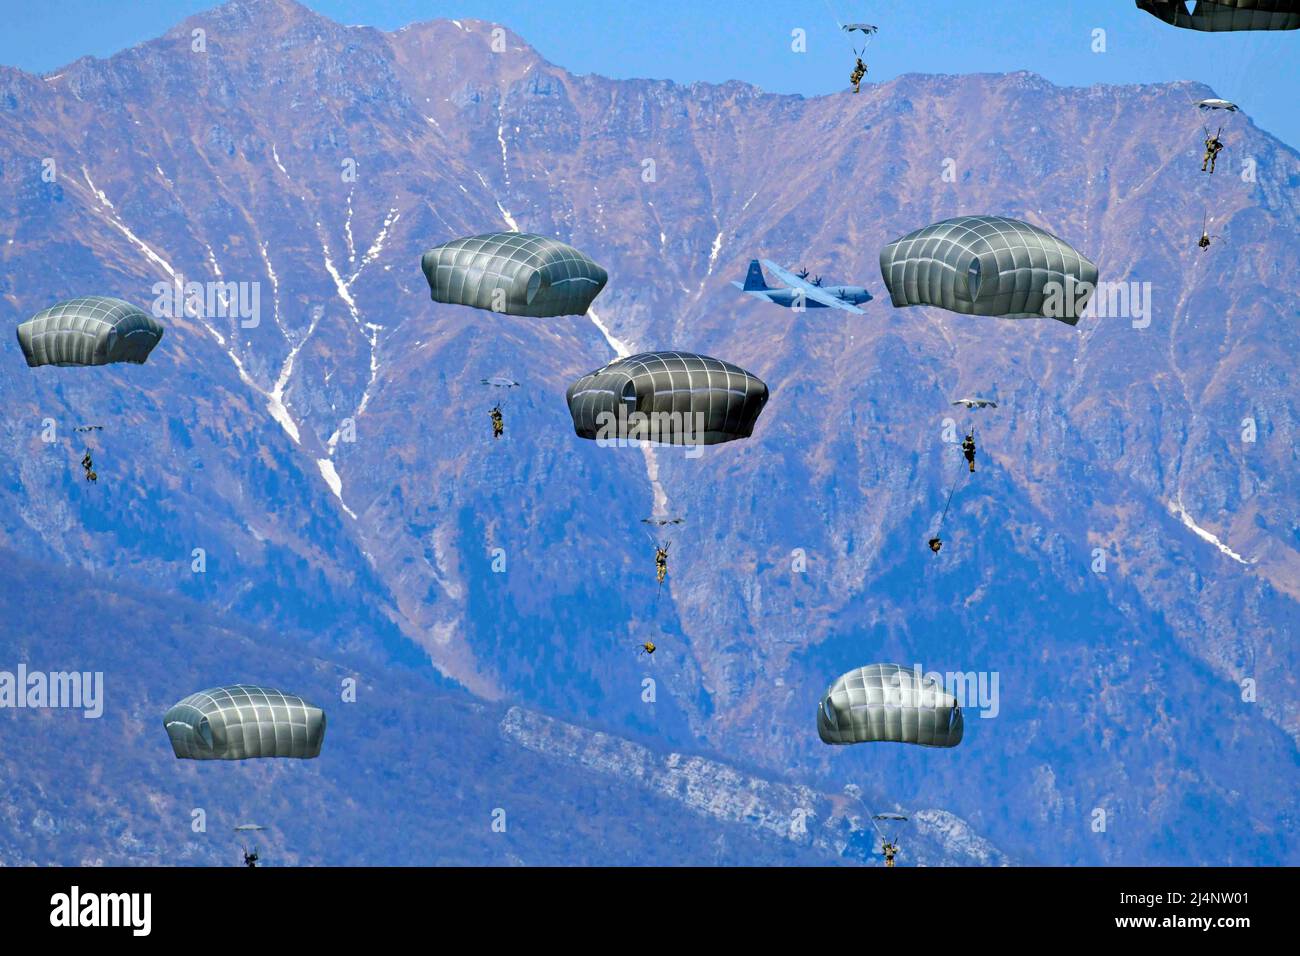 Pordenone, Italy. 12th Apr, 2022. U.S. Army paratroopers assigned to the 54th Brigade Engineer Battalion, 173rd Airborne Brigade, conduct an airborne operation from a U.S. Air Force 86th Air Wing C-130 Hercules aircraft onto Juliet Drop Zone in Pordenone, Italy on April 12, 2022. The 173rd Airborne Brigade is the U.S. Army Contingency Response Force in Europe, capable of projecting ready forces anywhere in the U.S. European, Africa or Central Commands' areas of responsibility. Credit: U.S. Army/ZUMA Press Wire Service/ZUMAPRESS.com/Alamy Live News Stock Photo